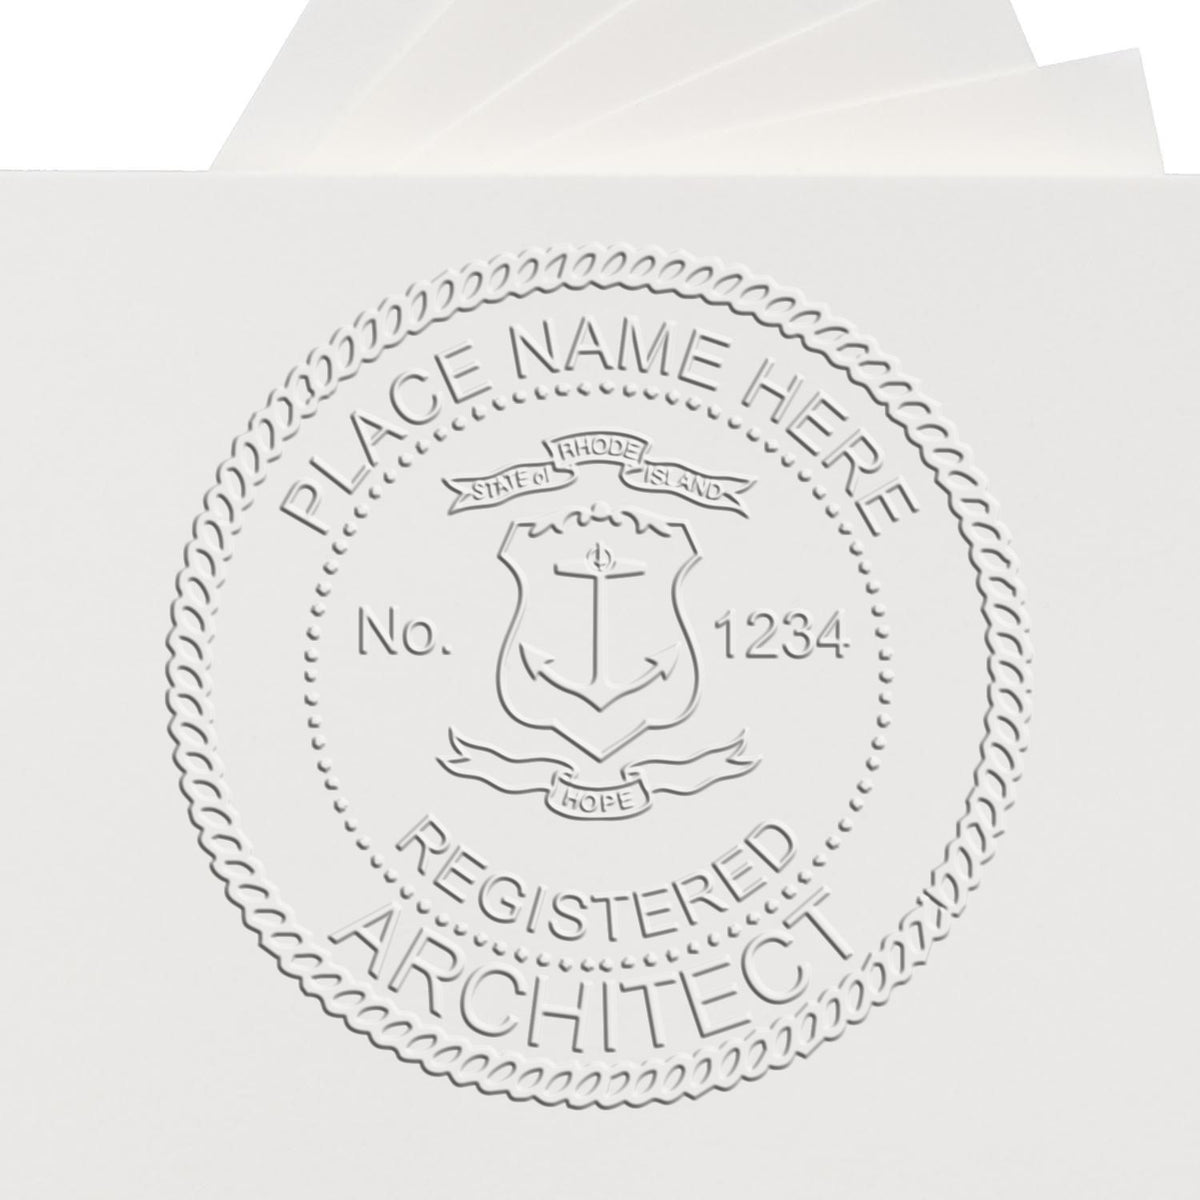 A stamped impression of the Rhode Island Desk Architect Embossing Seal in this stylish lifestyle photo, setting the tone for a unique and personalized product.